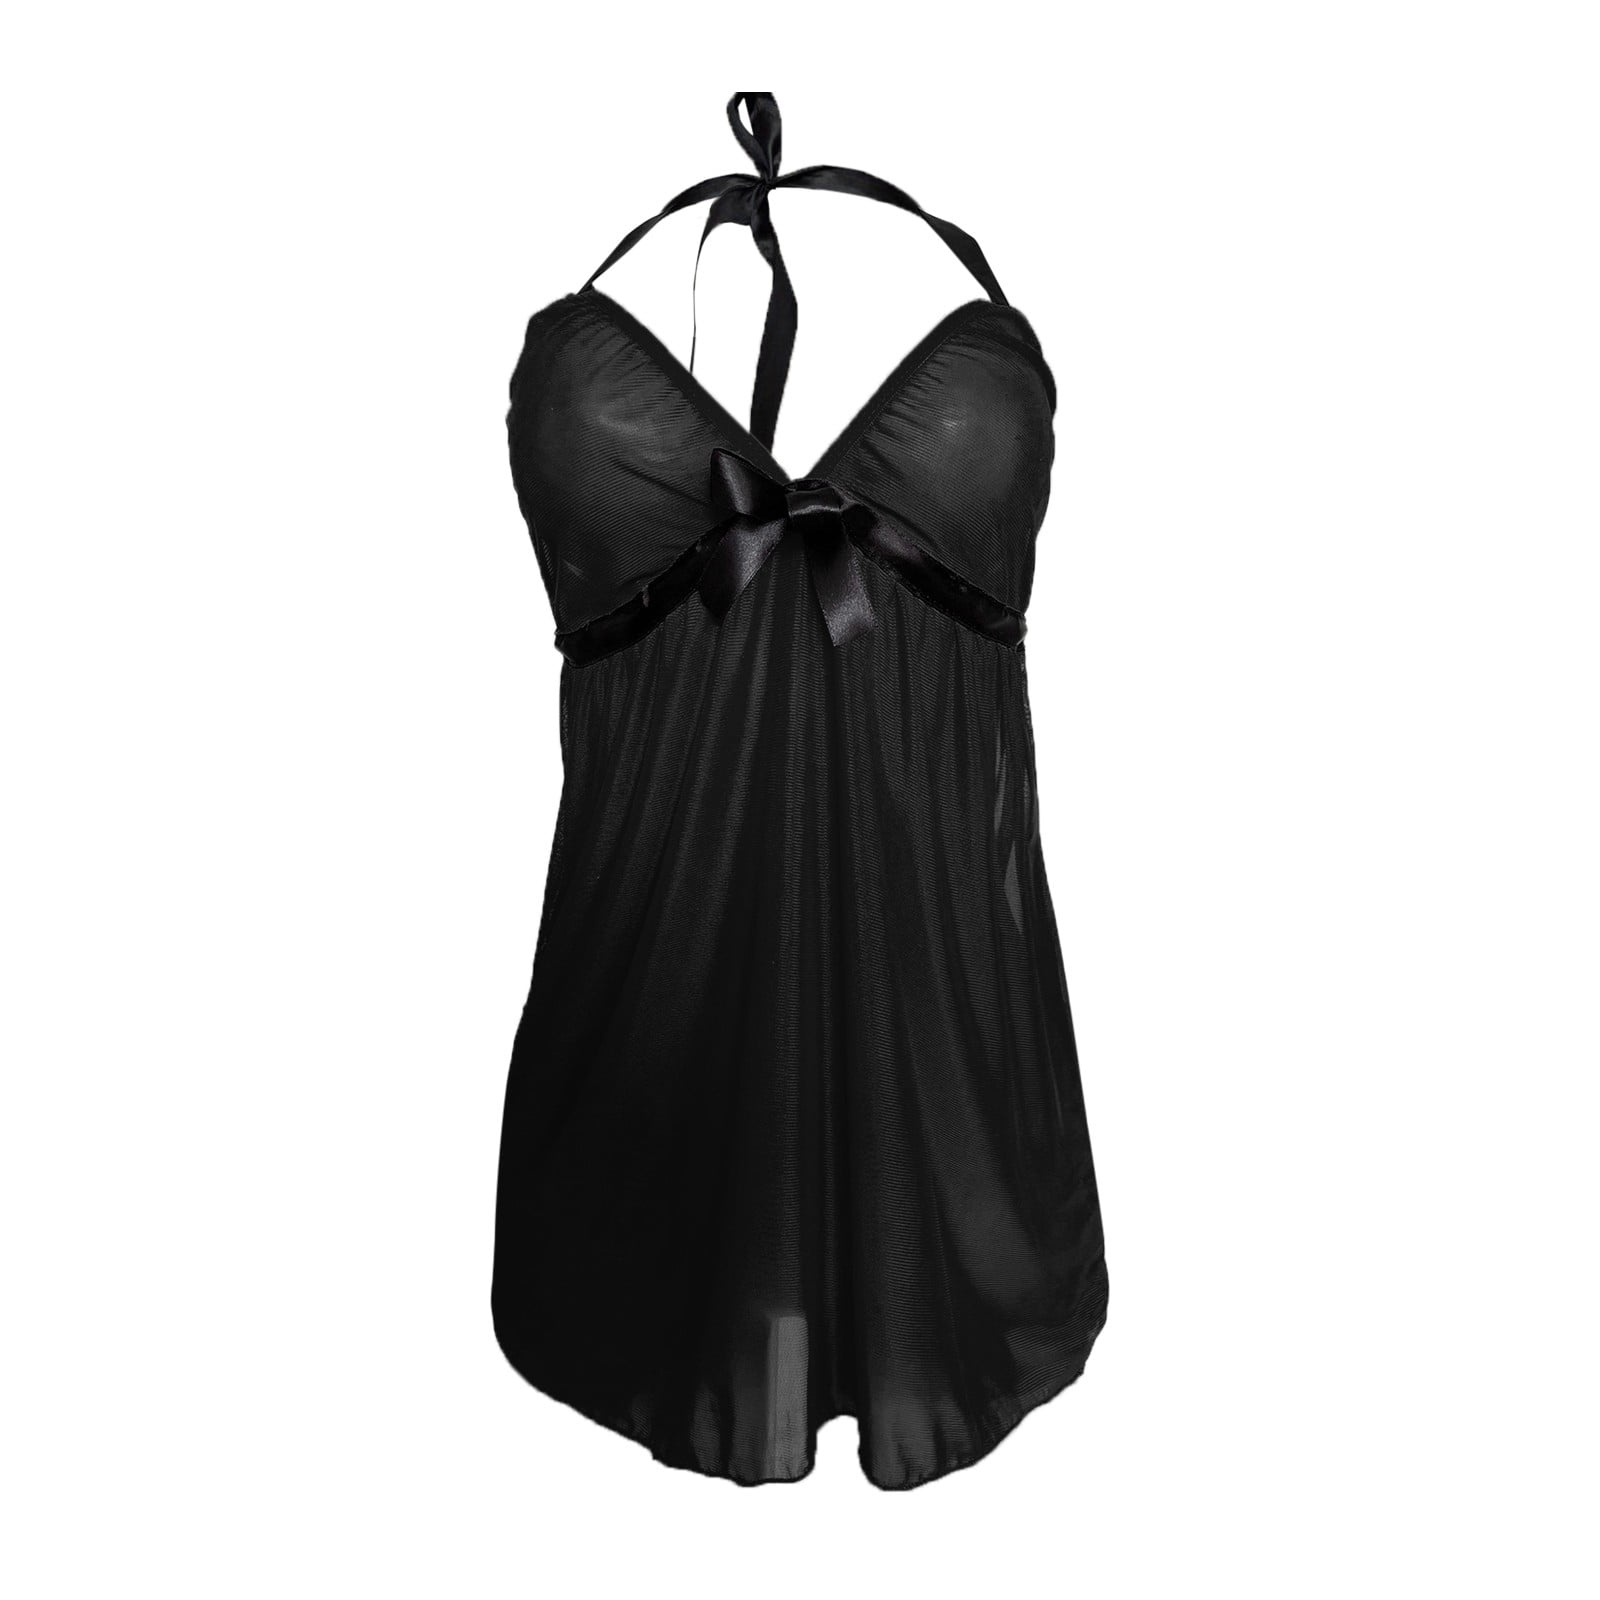 Black Lace Plus Size Babydoll Lingerie Sexy Transparent Transparent Lace  Sleepwear Dress With Hollow Out Chemise Underwear For Women C19010801 From  Shen8401, $9.05